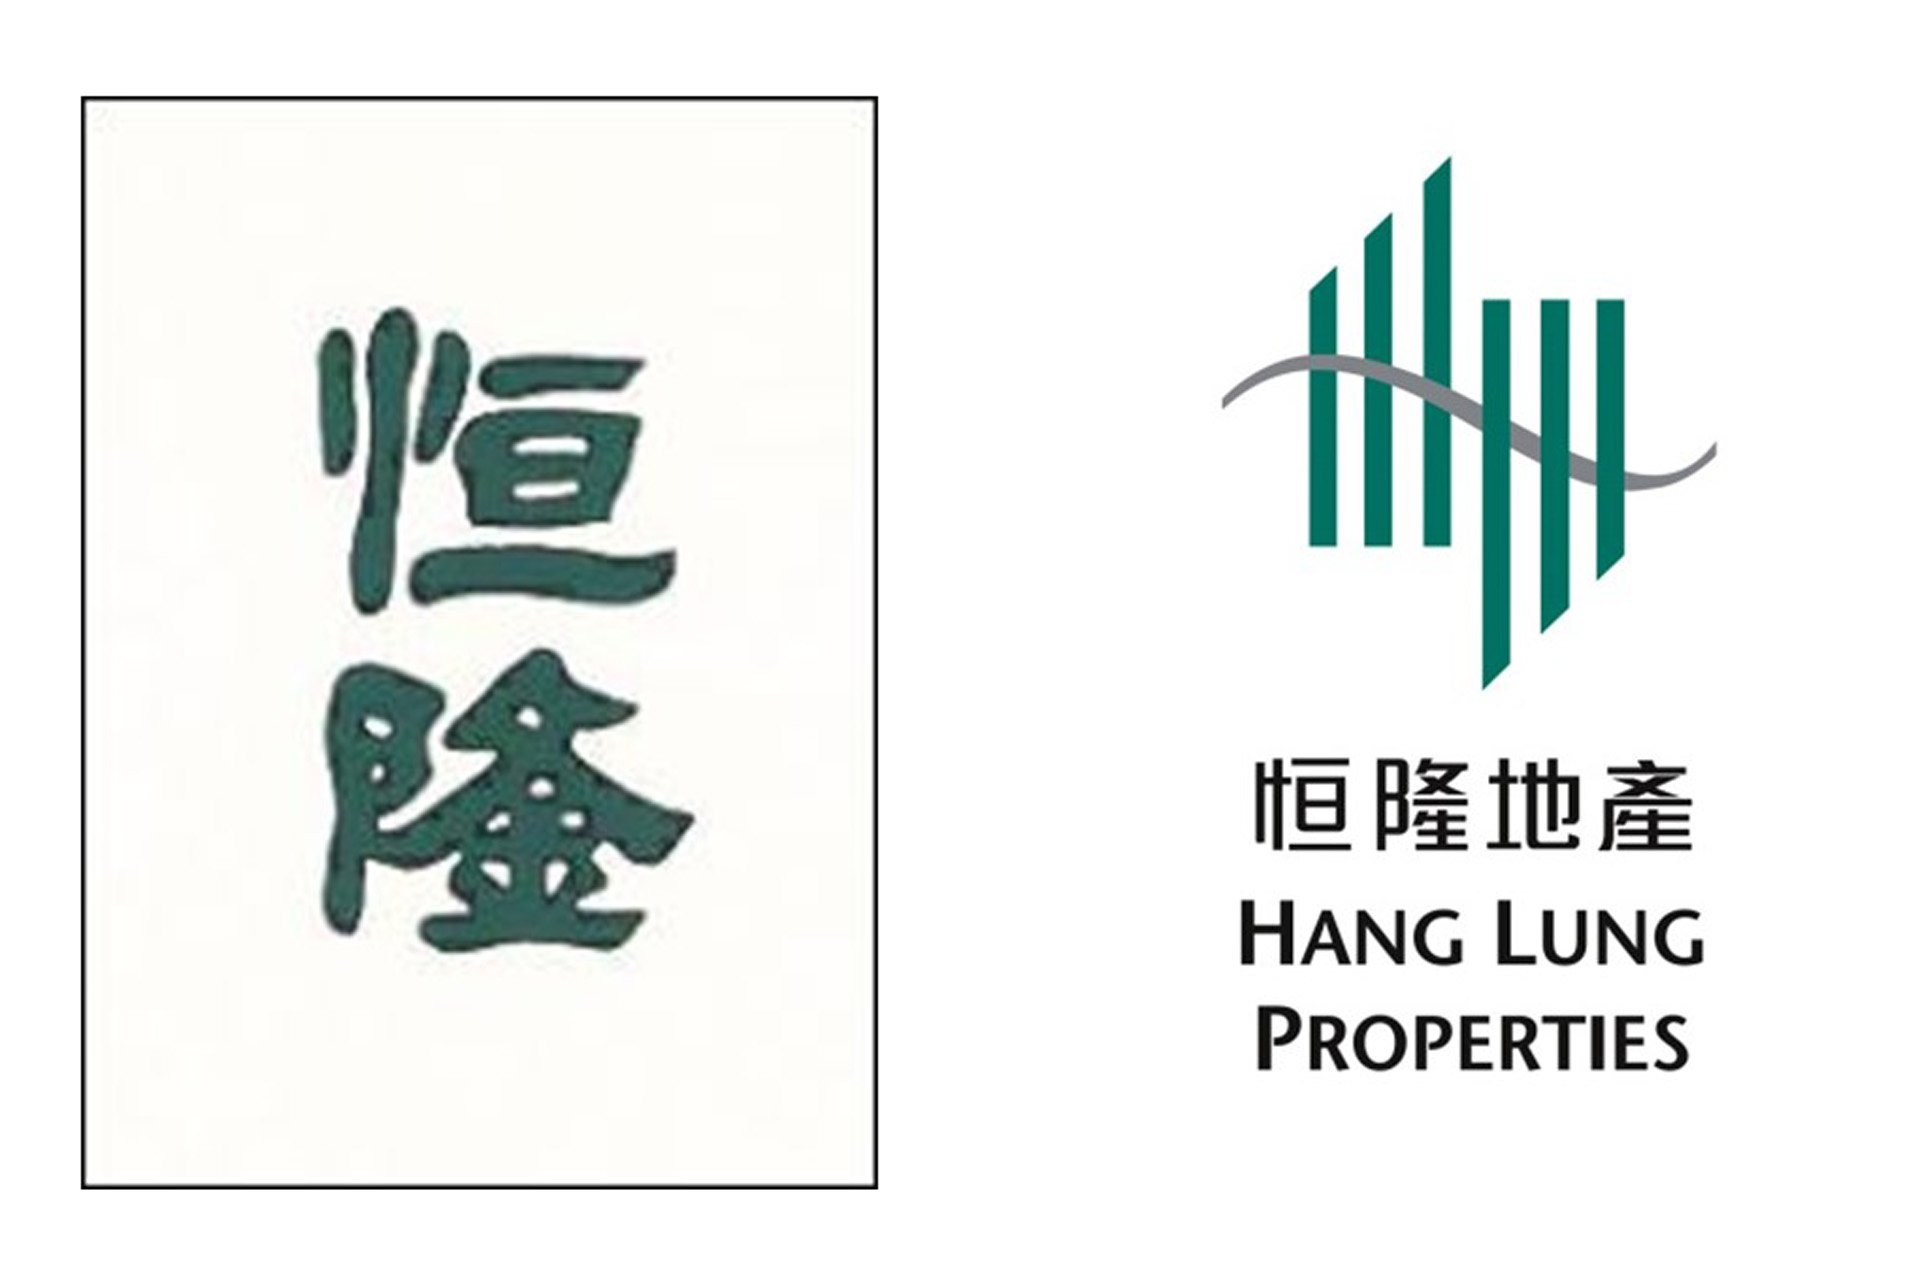 Old and New Hang Lung Logo